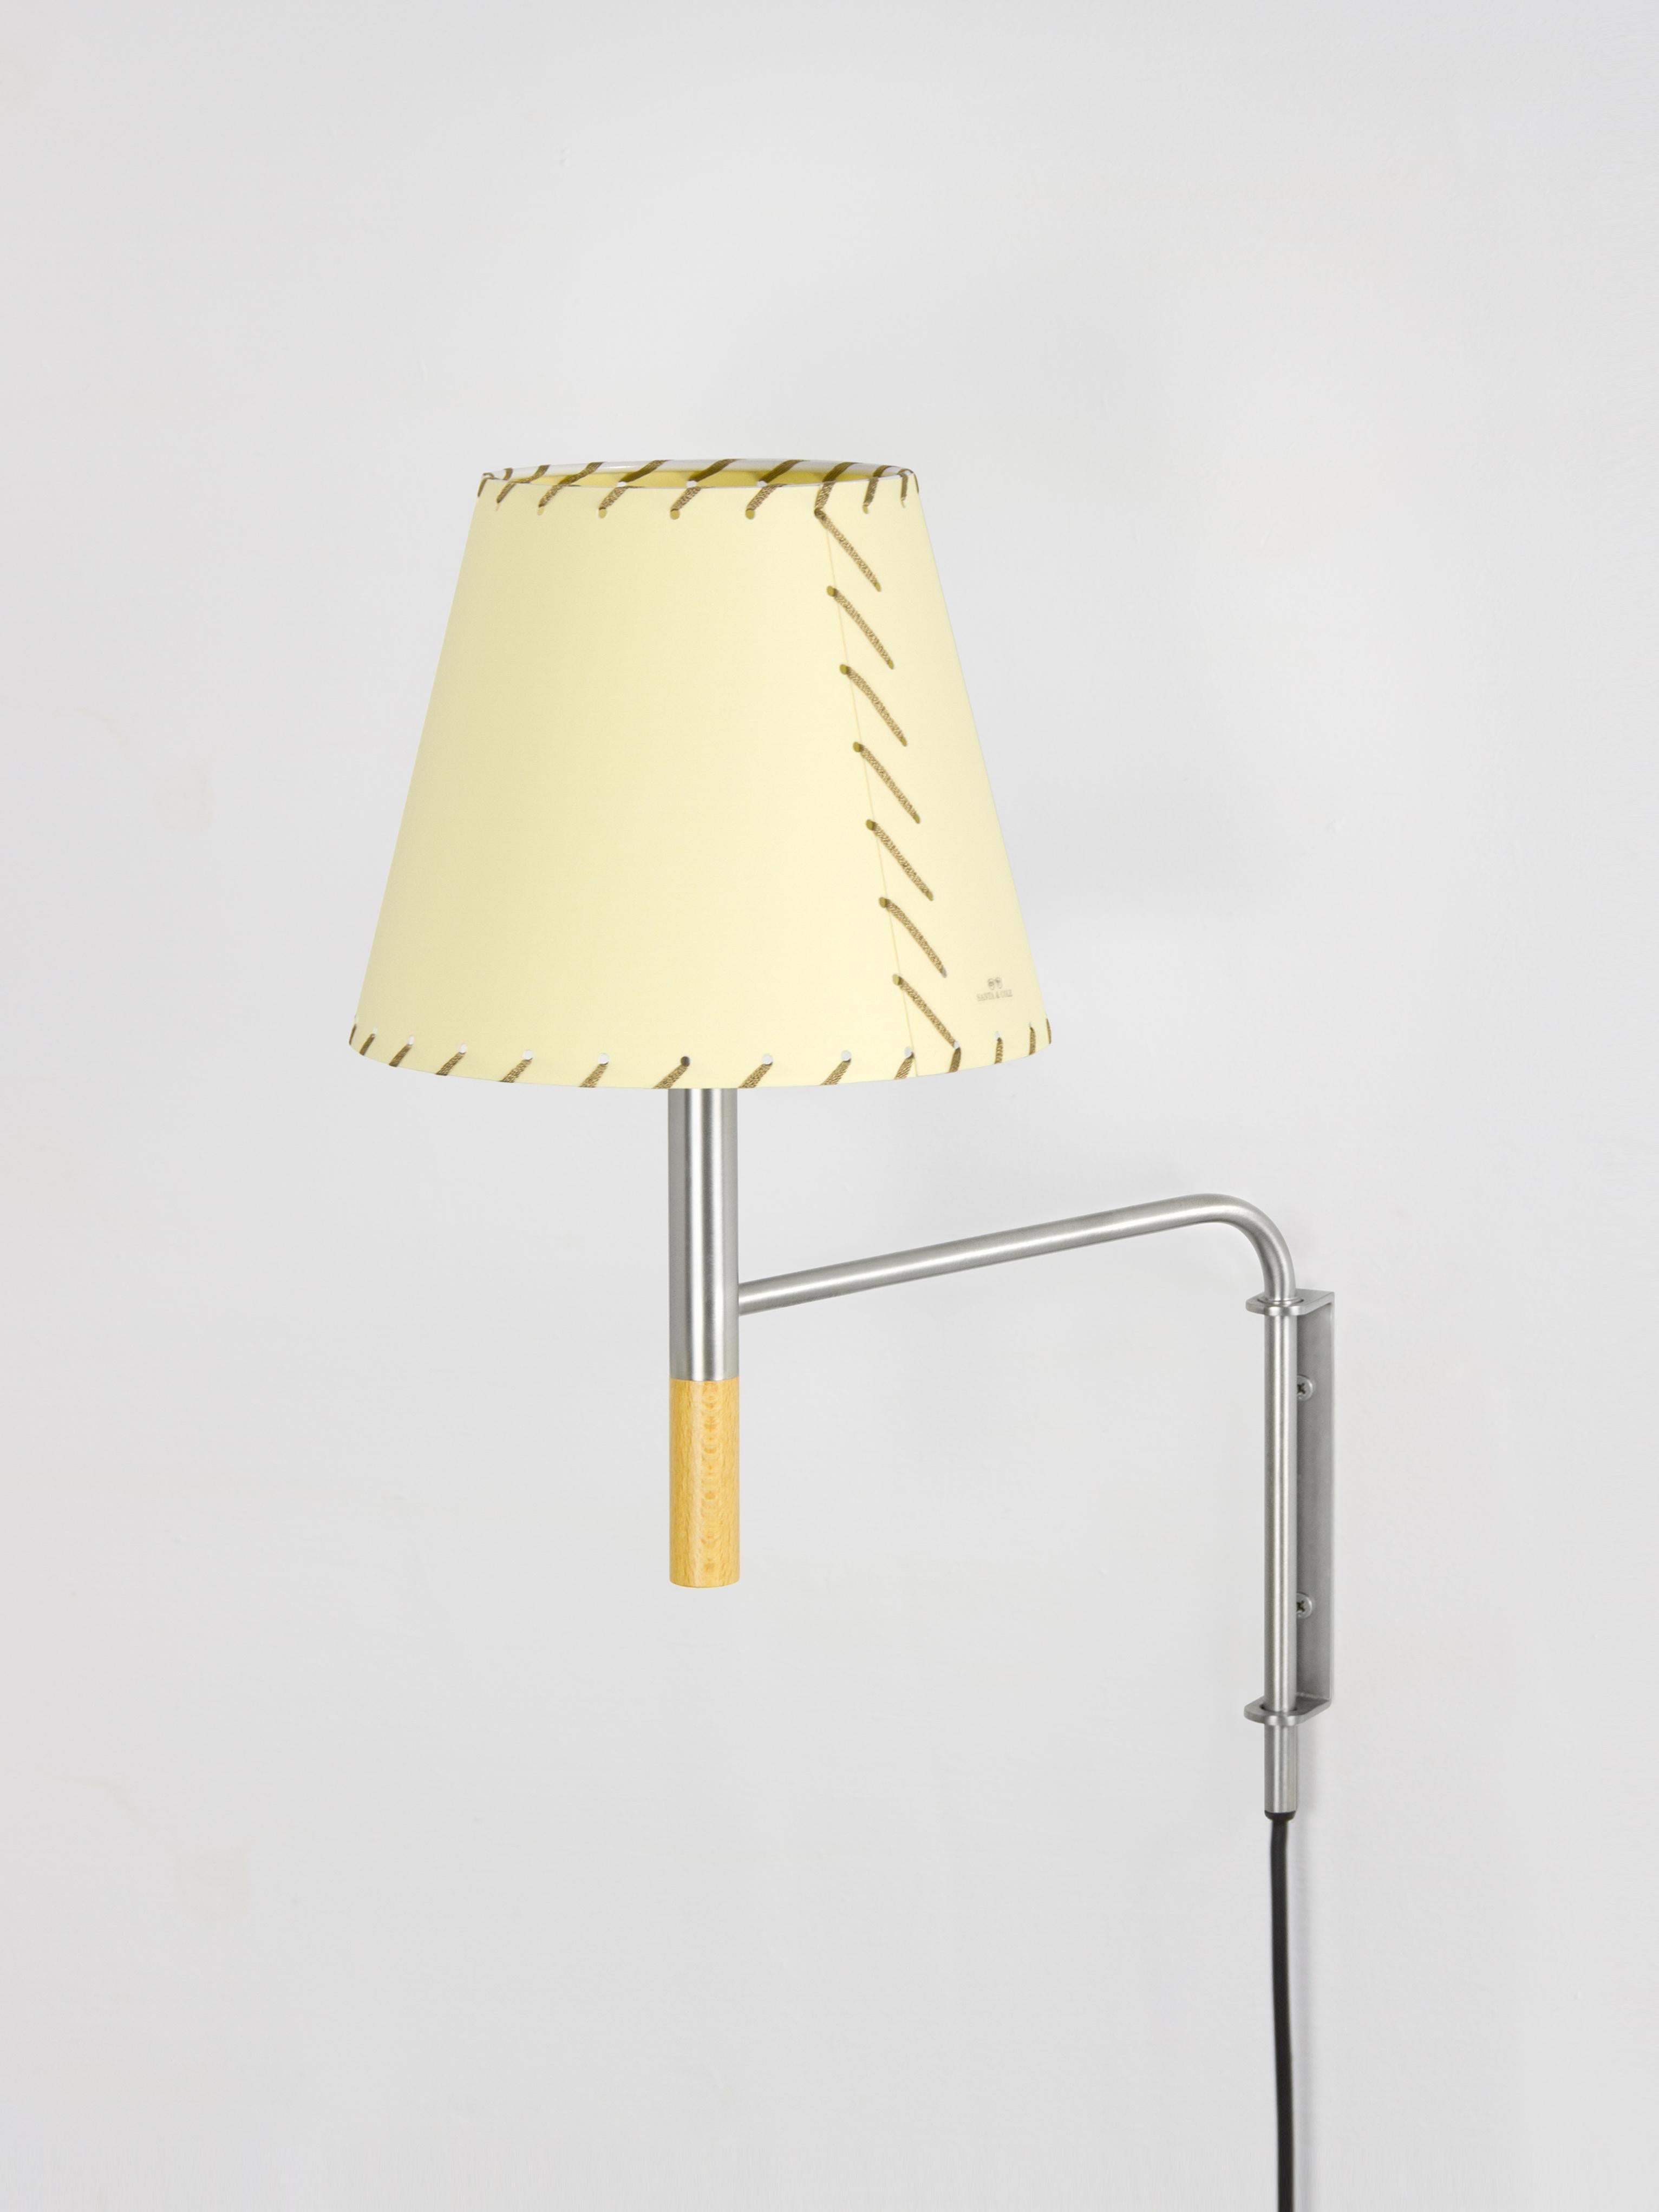 Beige BC1 wall lamp by Santa & Cole
Dimensions: D 20 x W 35 x H 44 cm
Materials: Metal, beech wood, stitched parchment.

The BC1, BC2 and BC3 wall lamps are the epitome of sturdy construction, aesthetic sobriety and functional quality. Their